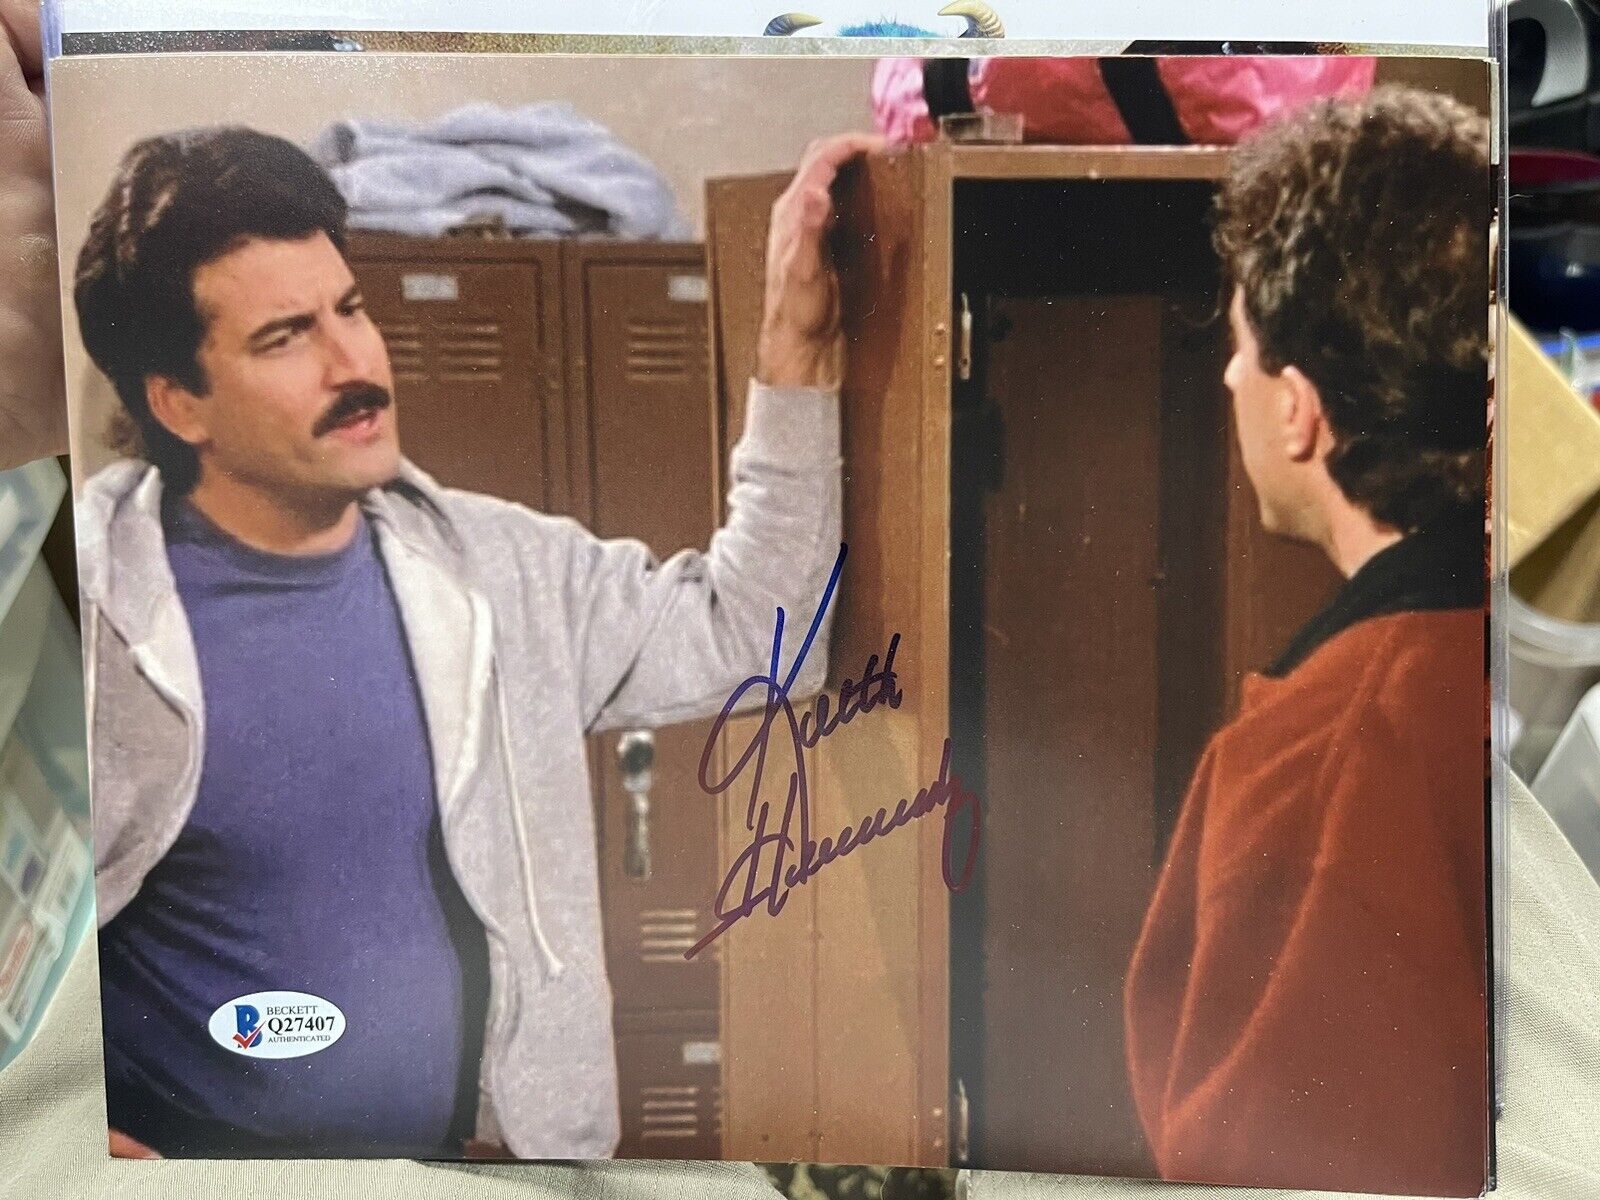 Seinfeld guest NY Mets  Keith Hernandez  Autographed 8x10 Photo Beckett Auth D2